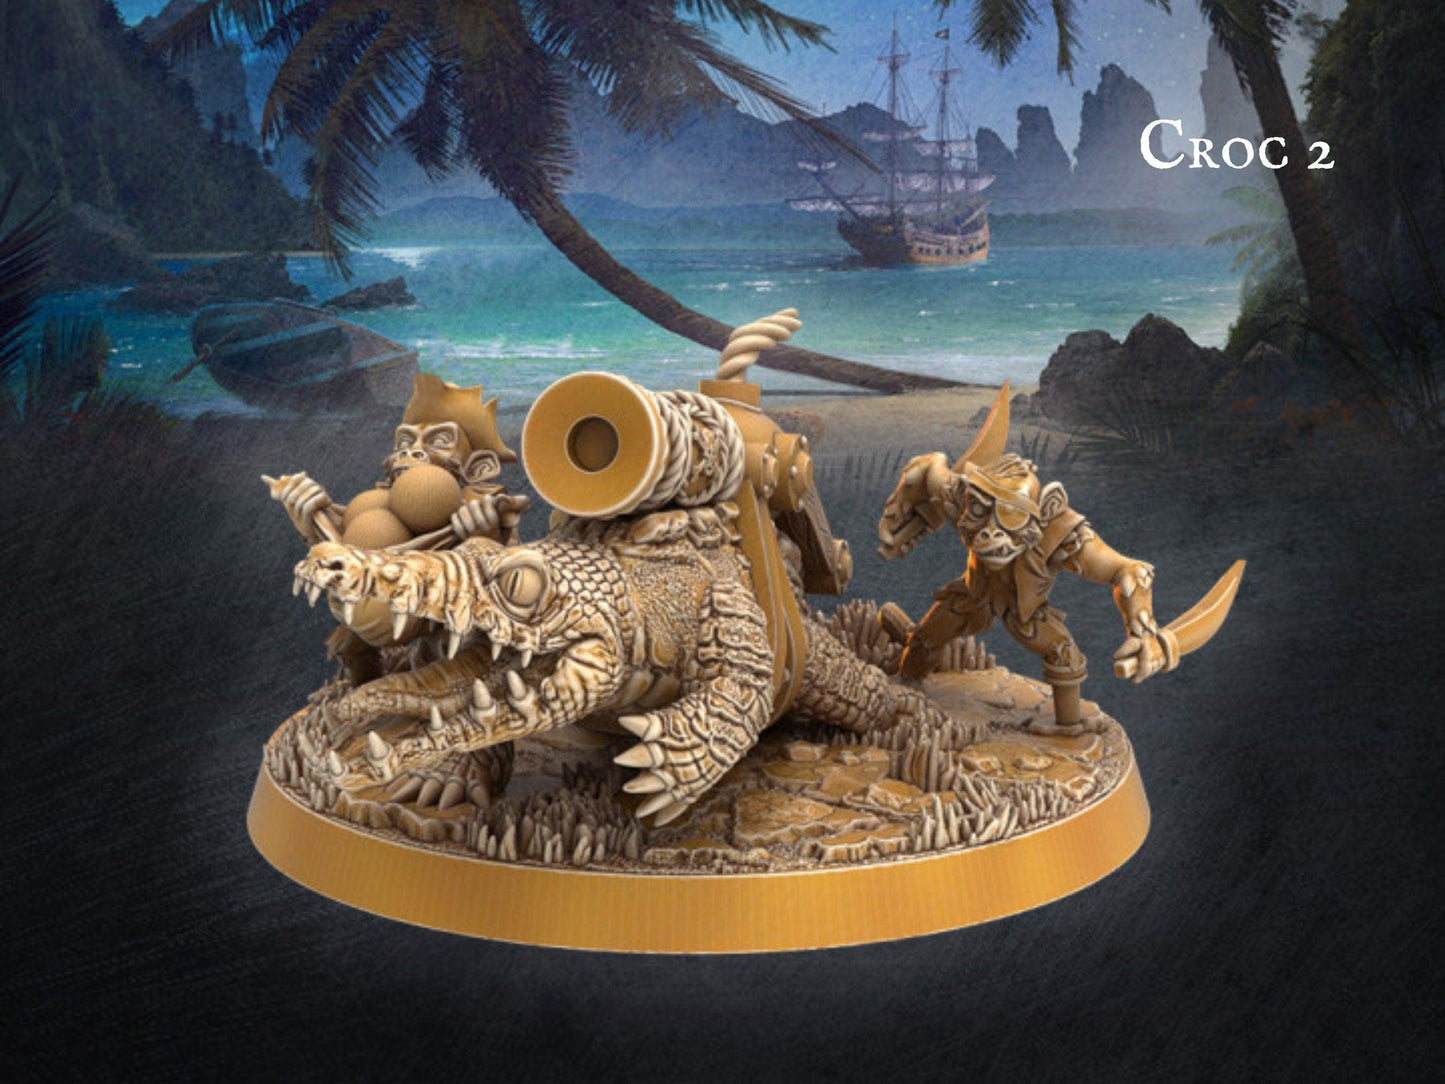 Pirate cannon crocodile miniature - 32mm scale Tabletop gaming DnD Miniature Dungeons and Dragons, wargaming dnd pirate figurine - Plague Miniatures shop for DnD Miniatures